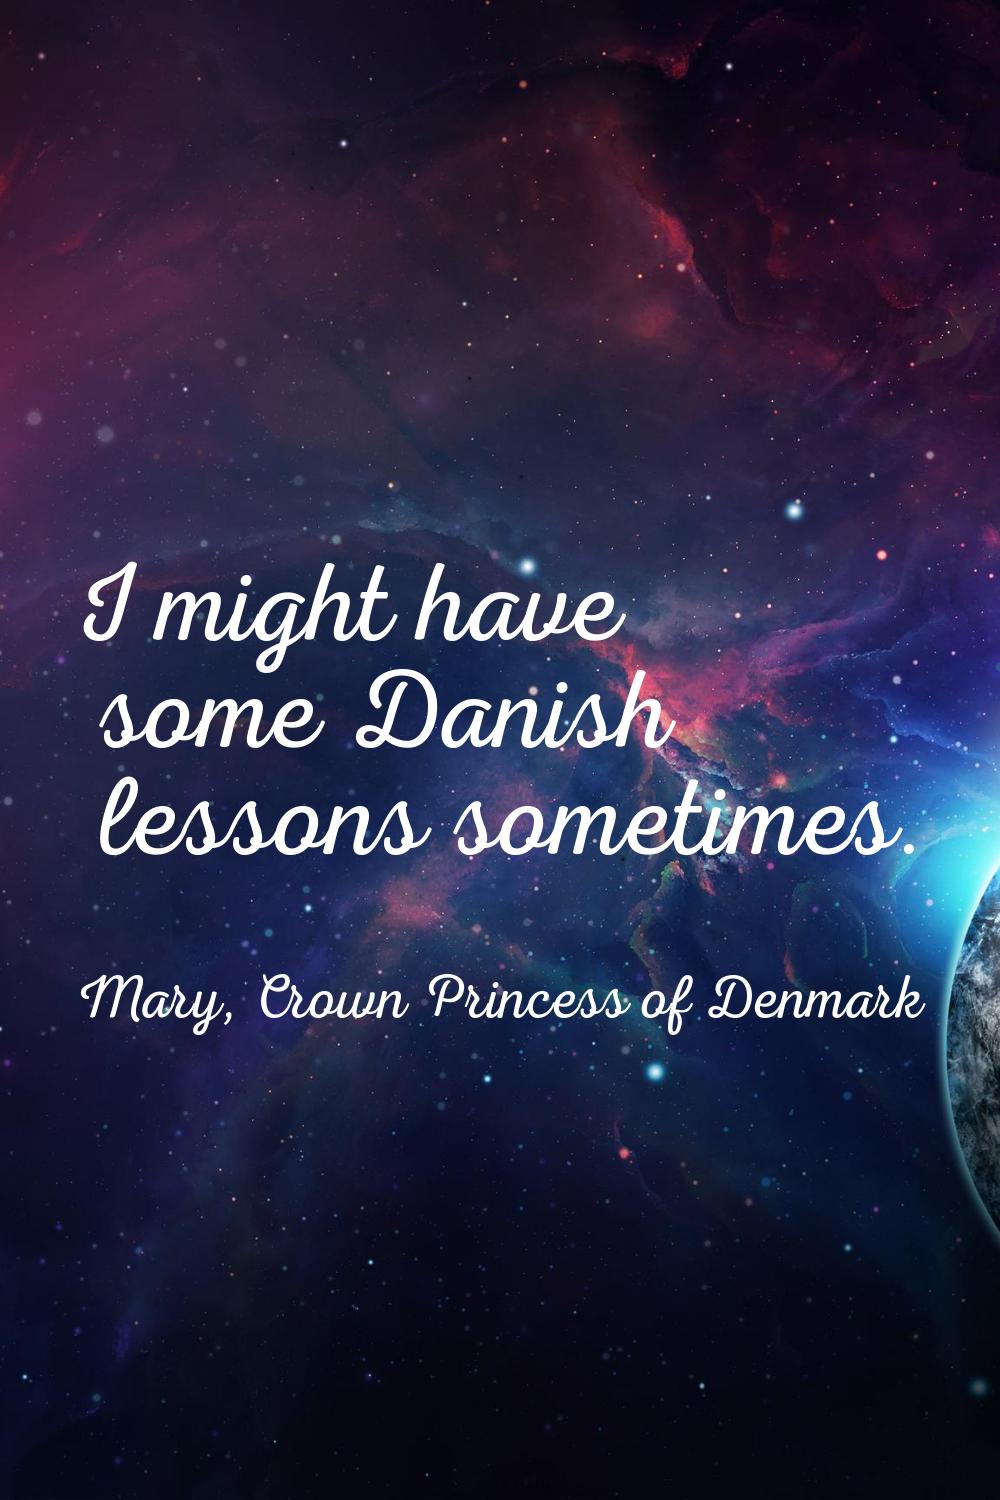 I might have some Danish lessons sometimes.